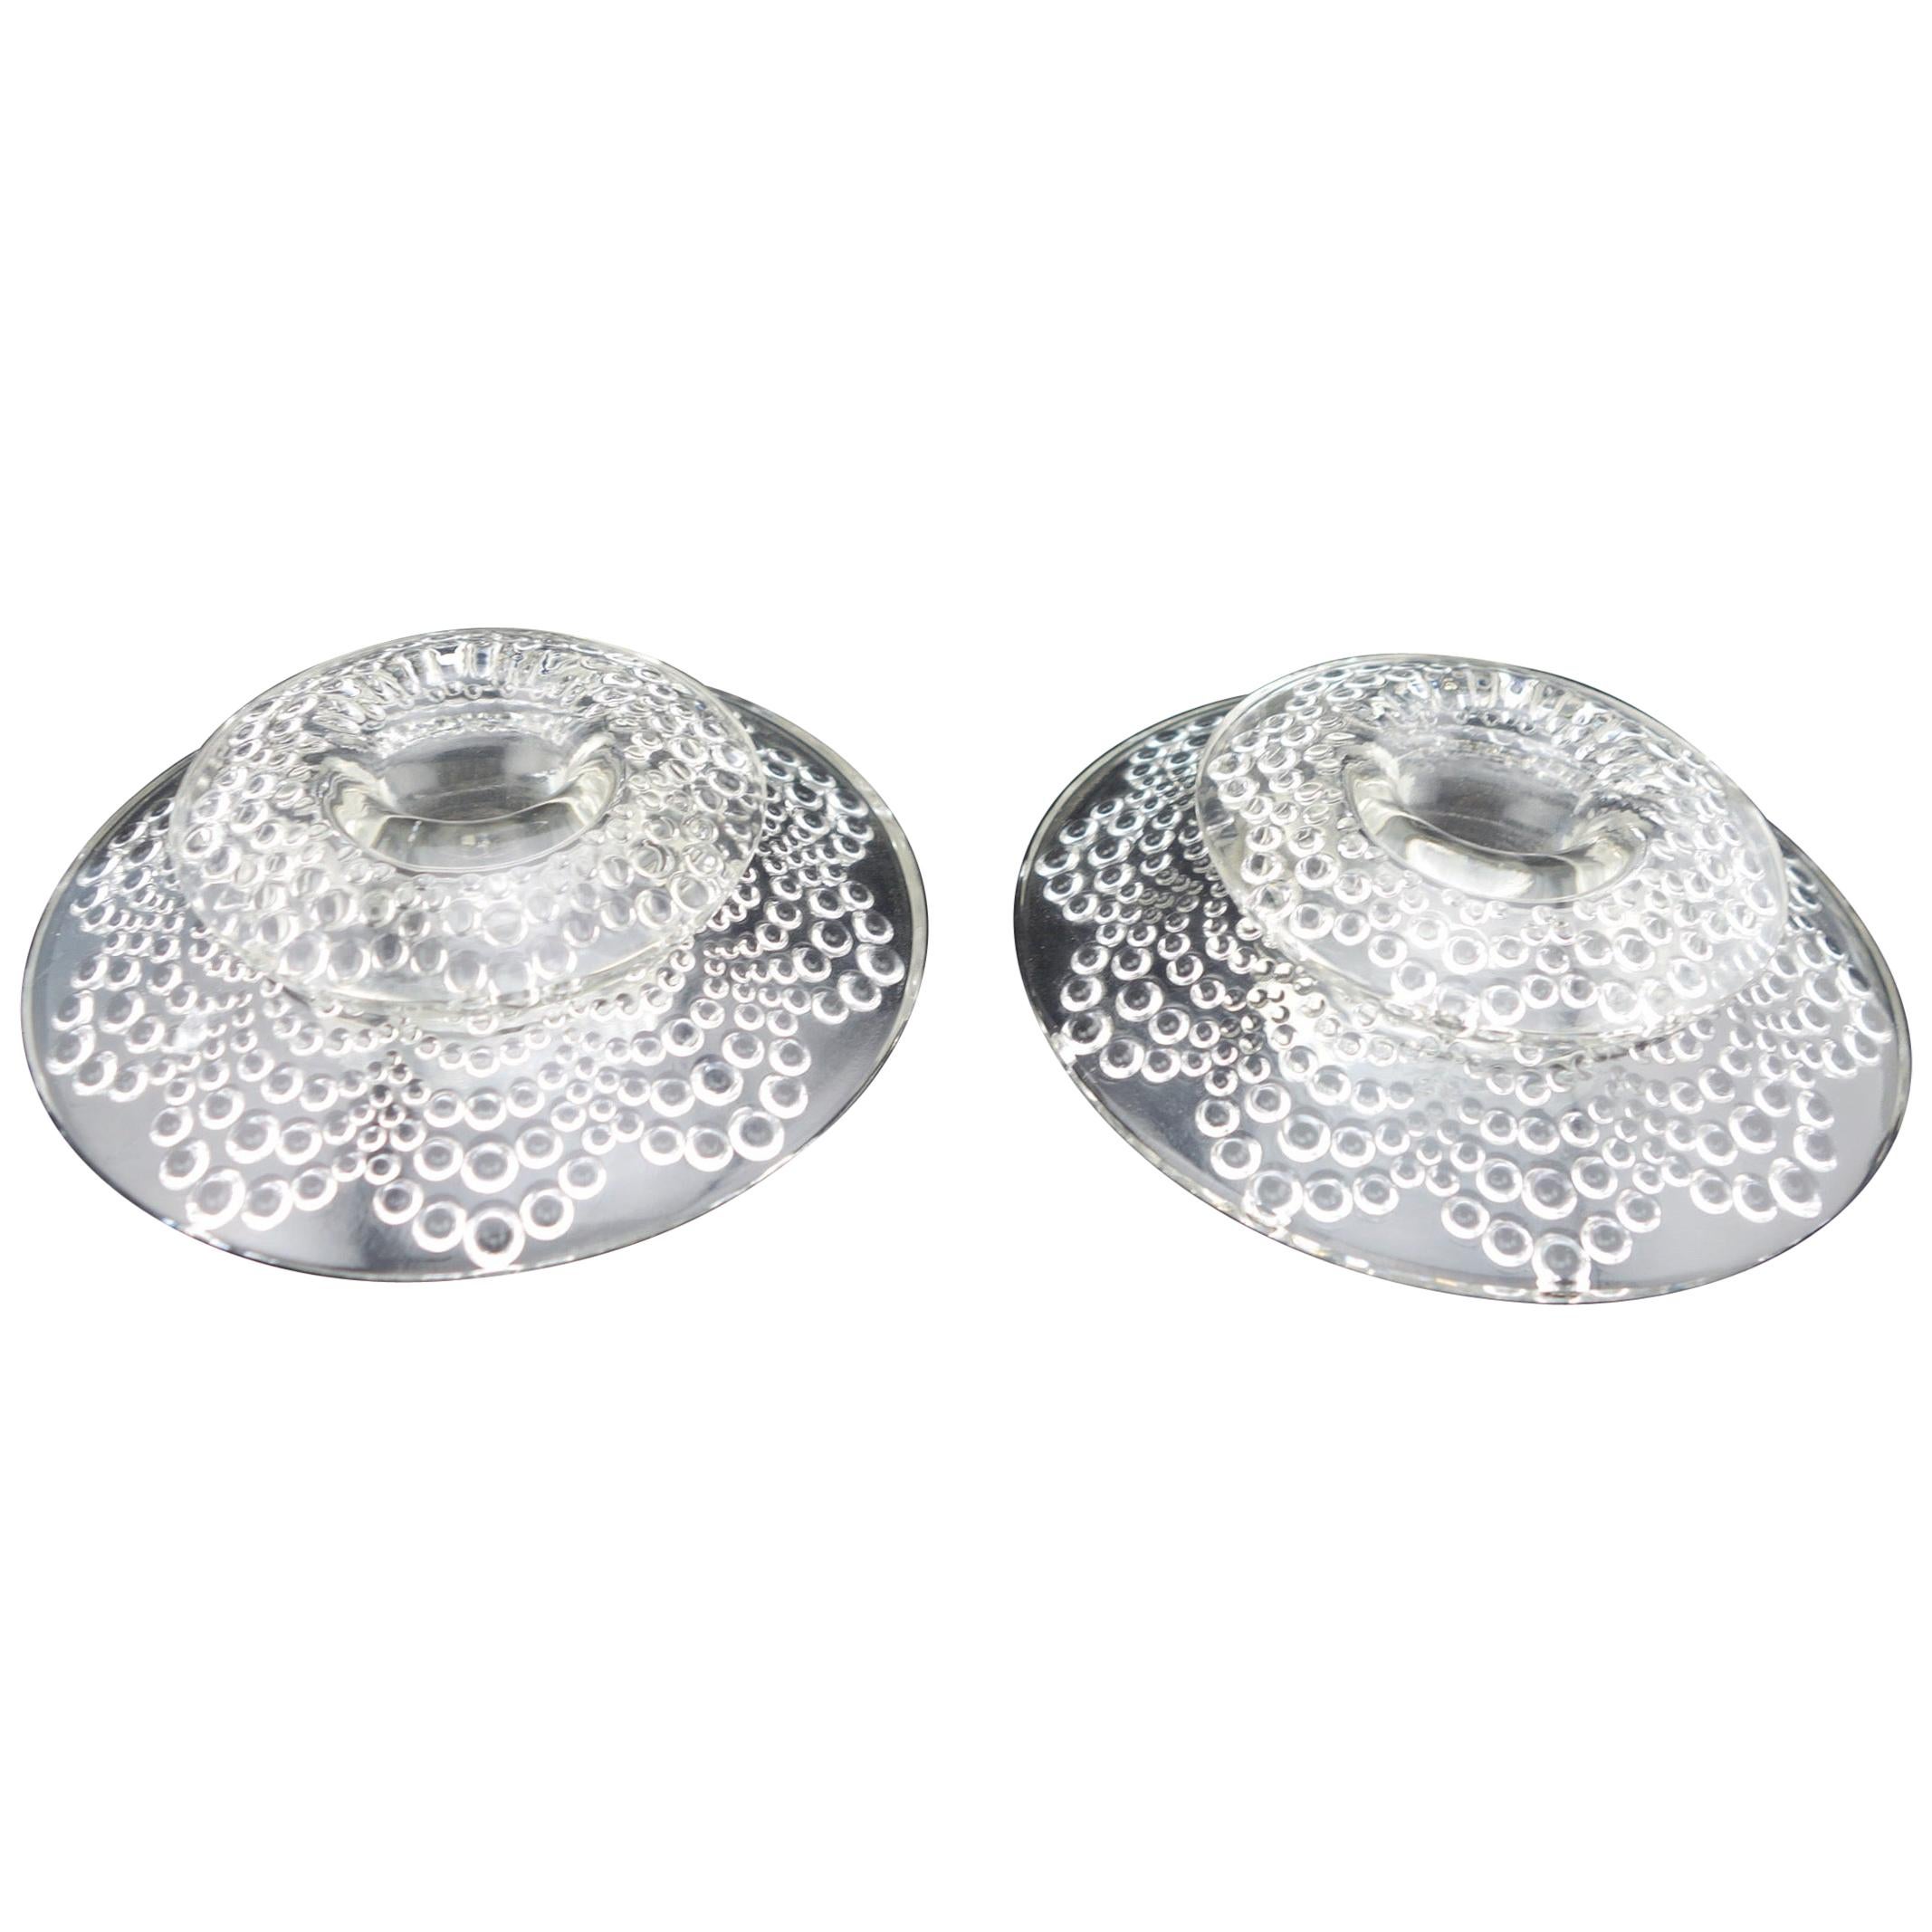 R Lalique Pair of St Gall Candleholders, 1934 For Sale